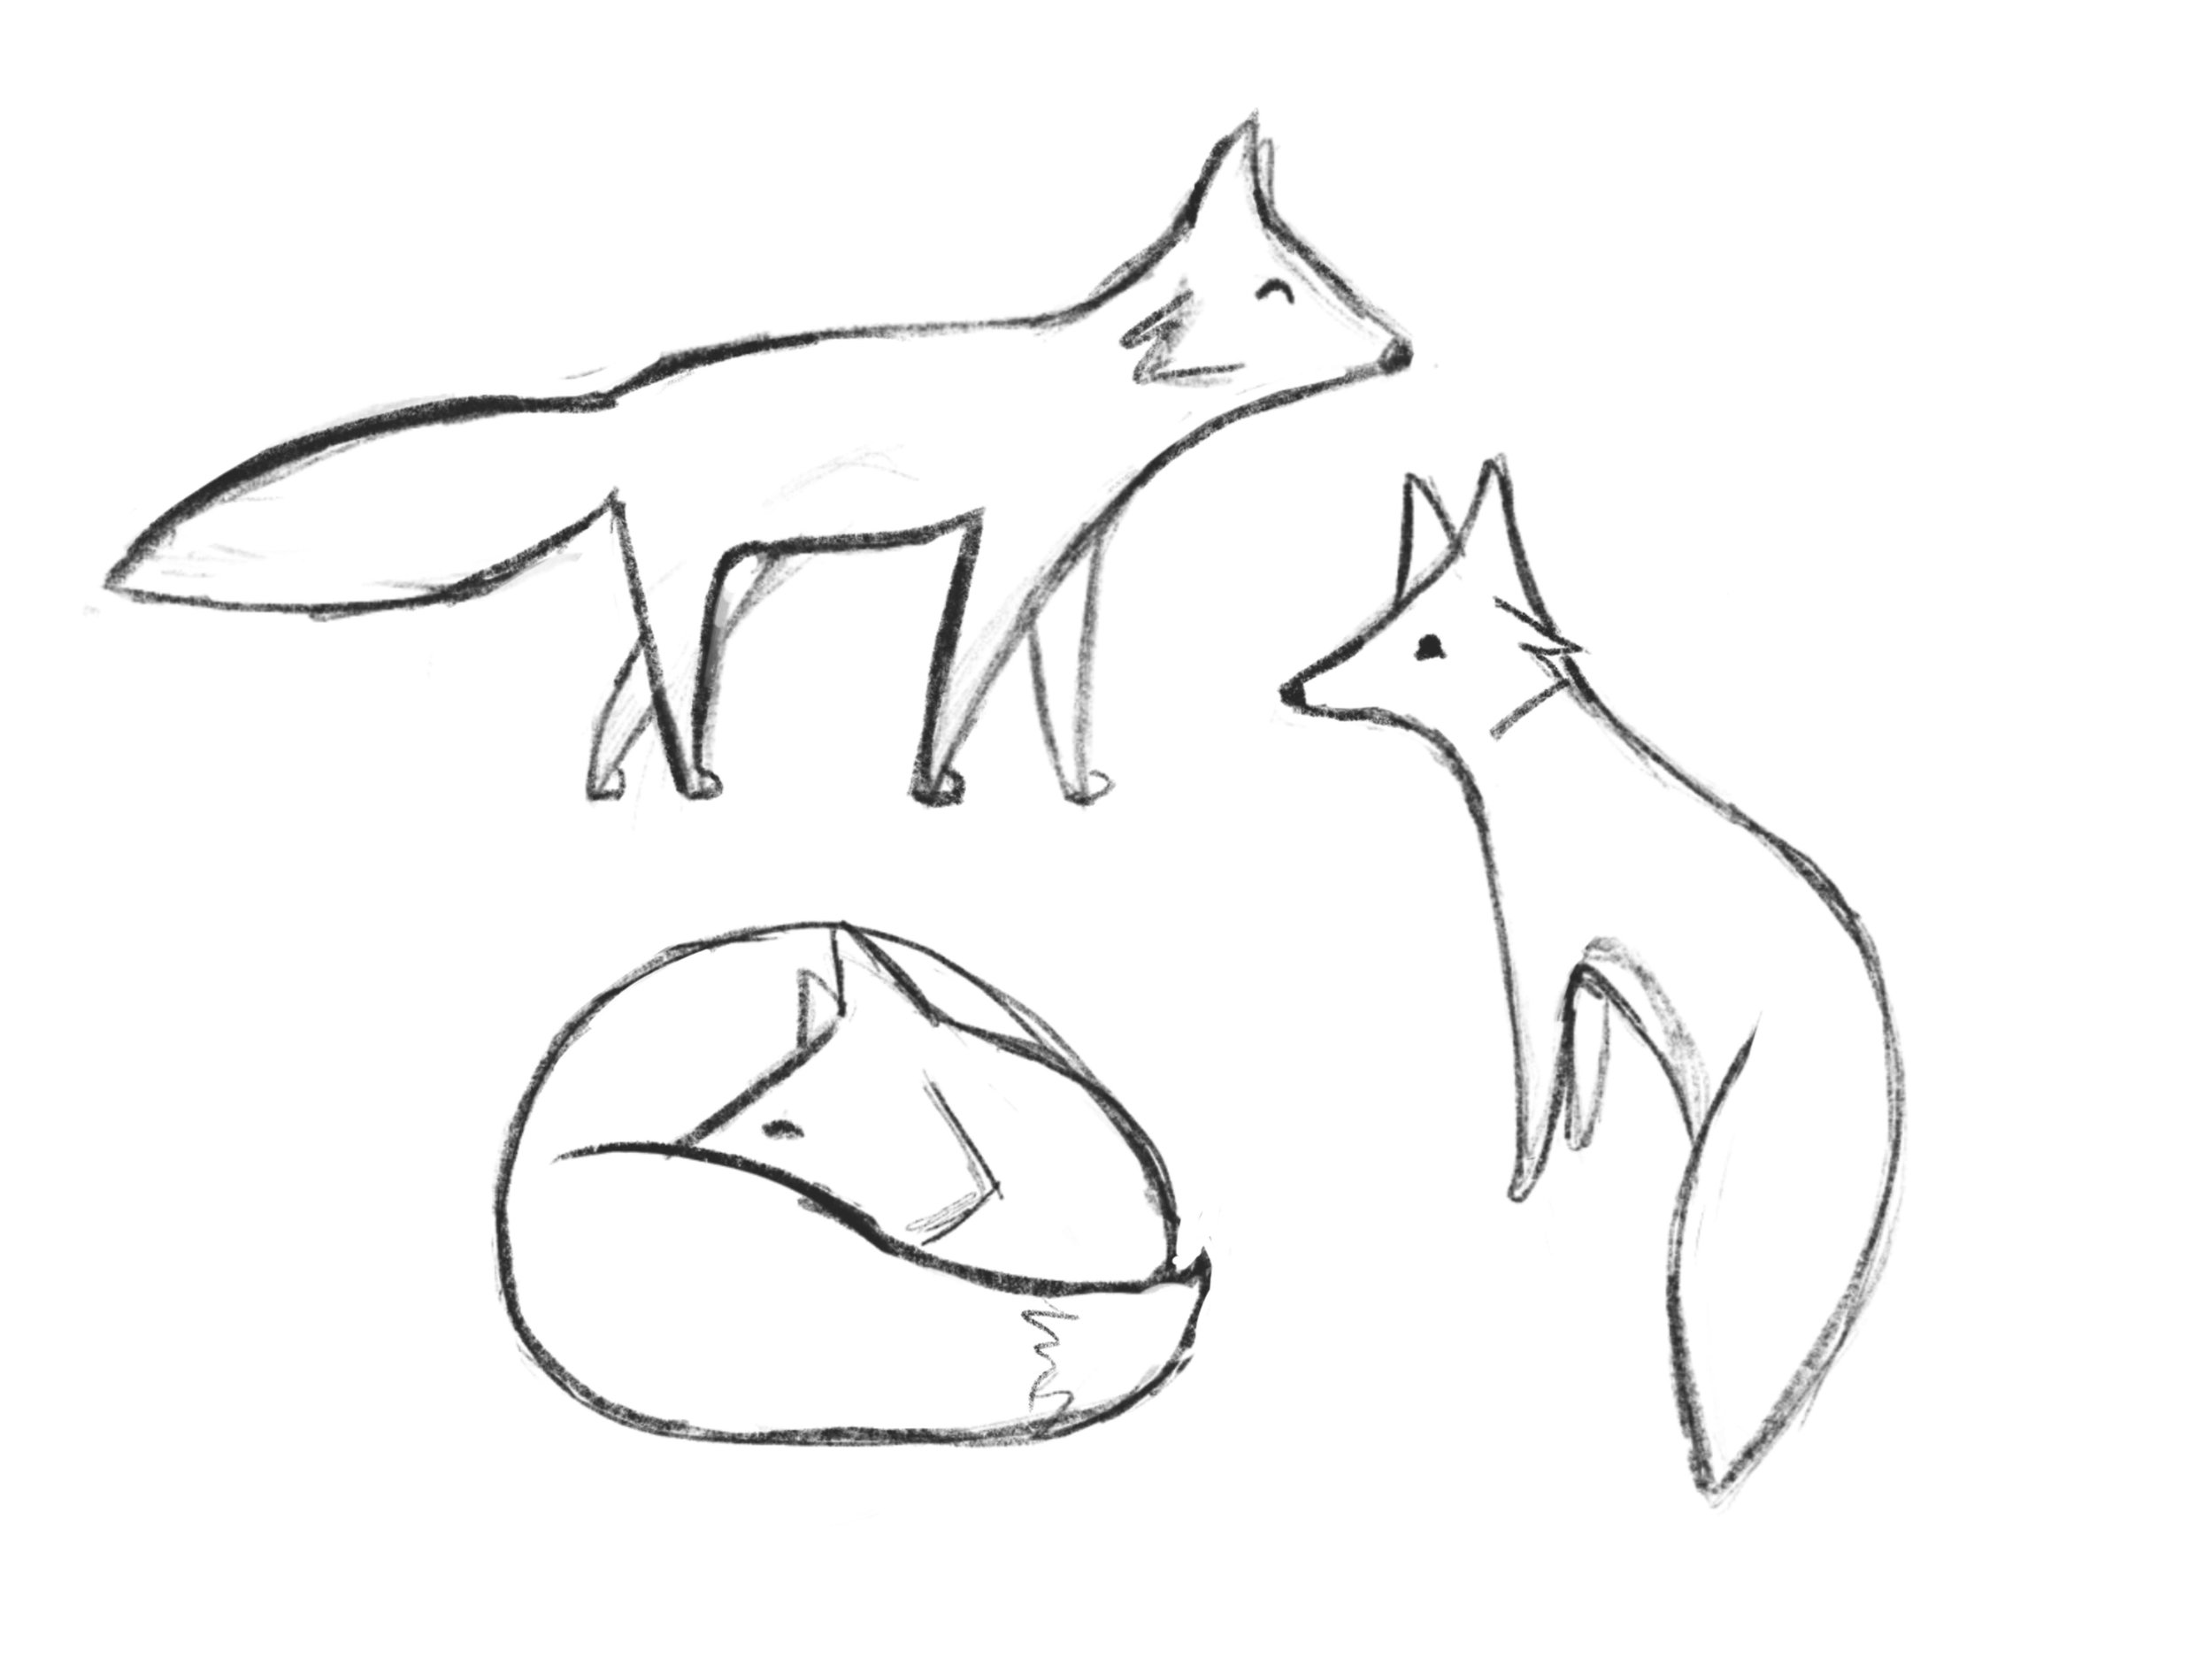 How to make a poster article. Image of foxes drawing